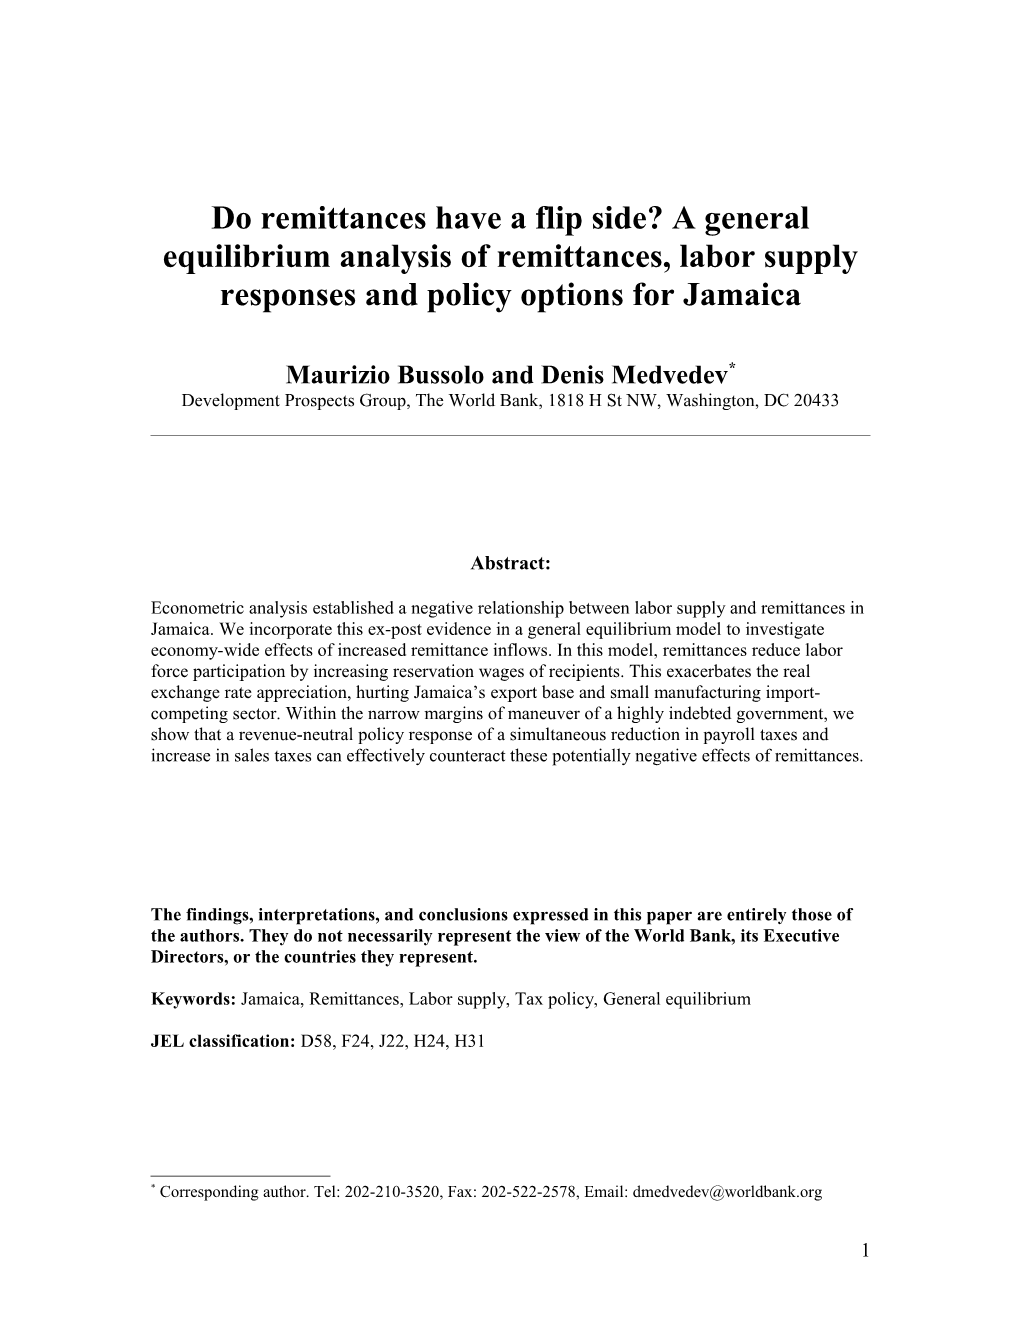 Do Remittances Have a Flip Side? a General Equilibrium Analysis of Remittances, Labor